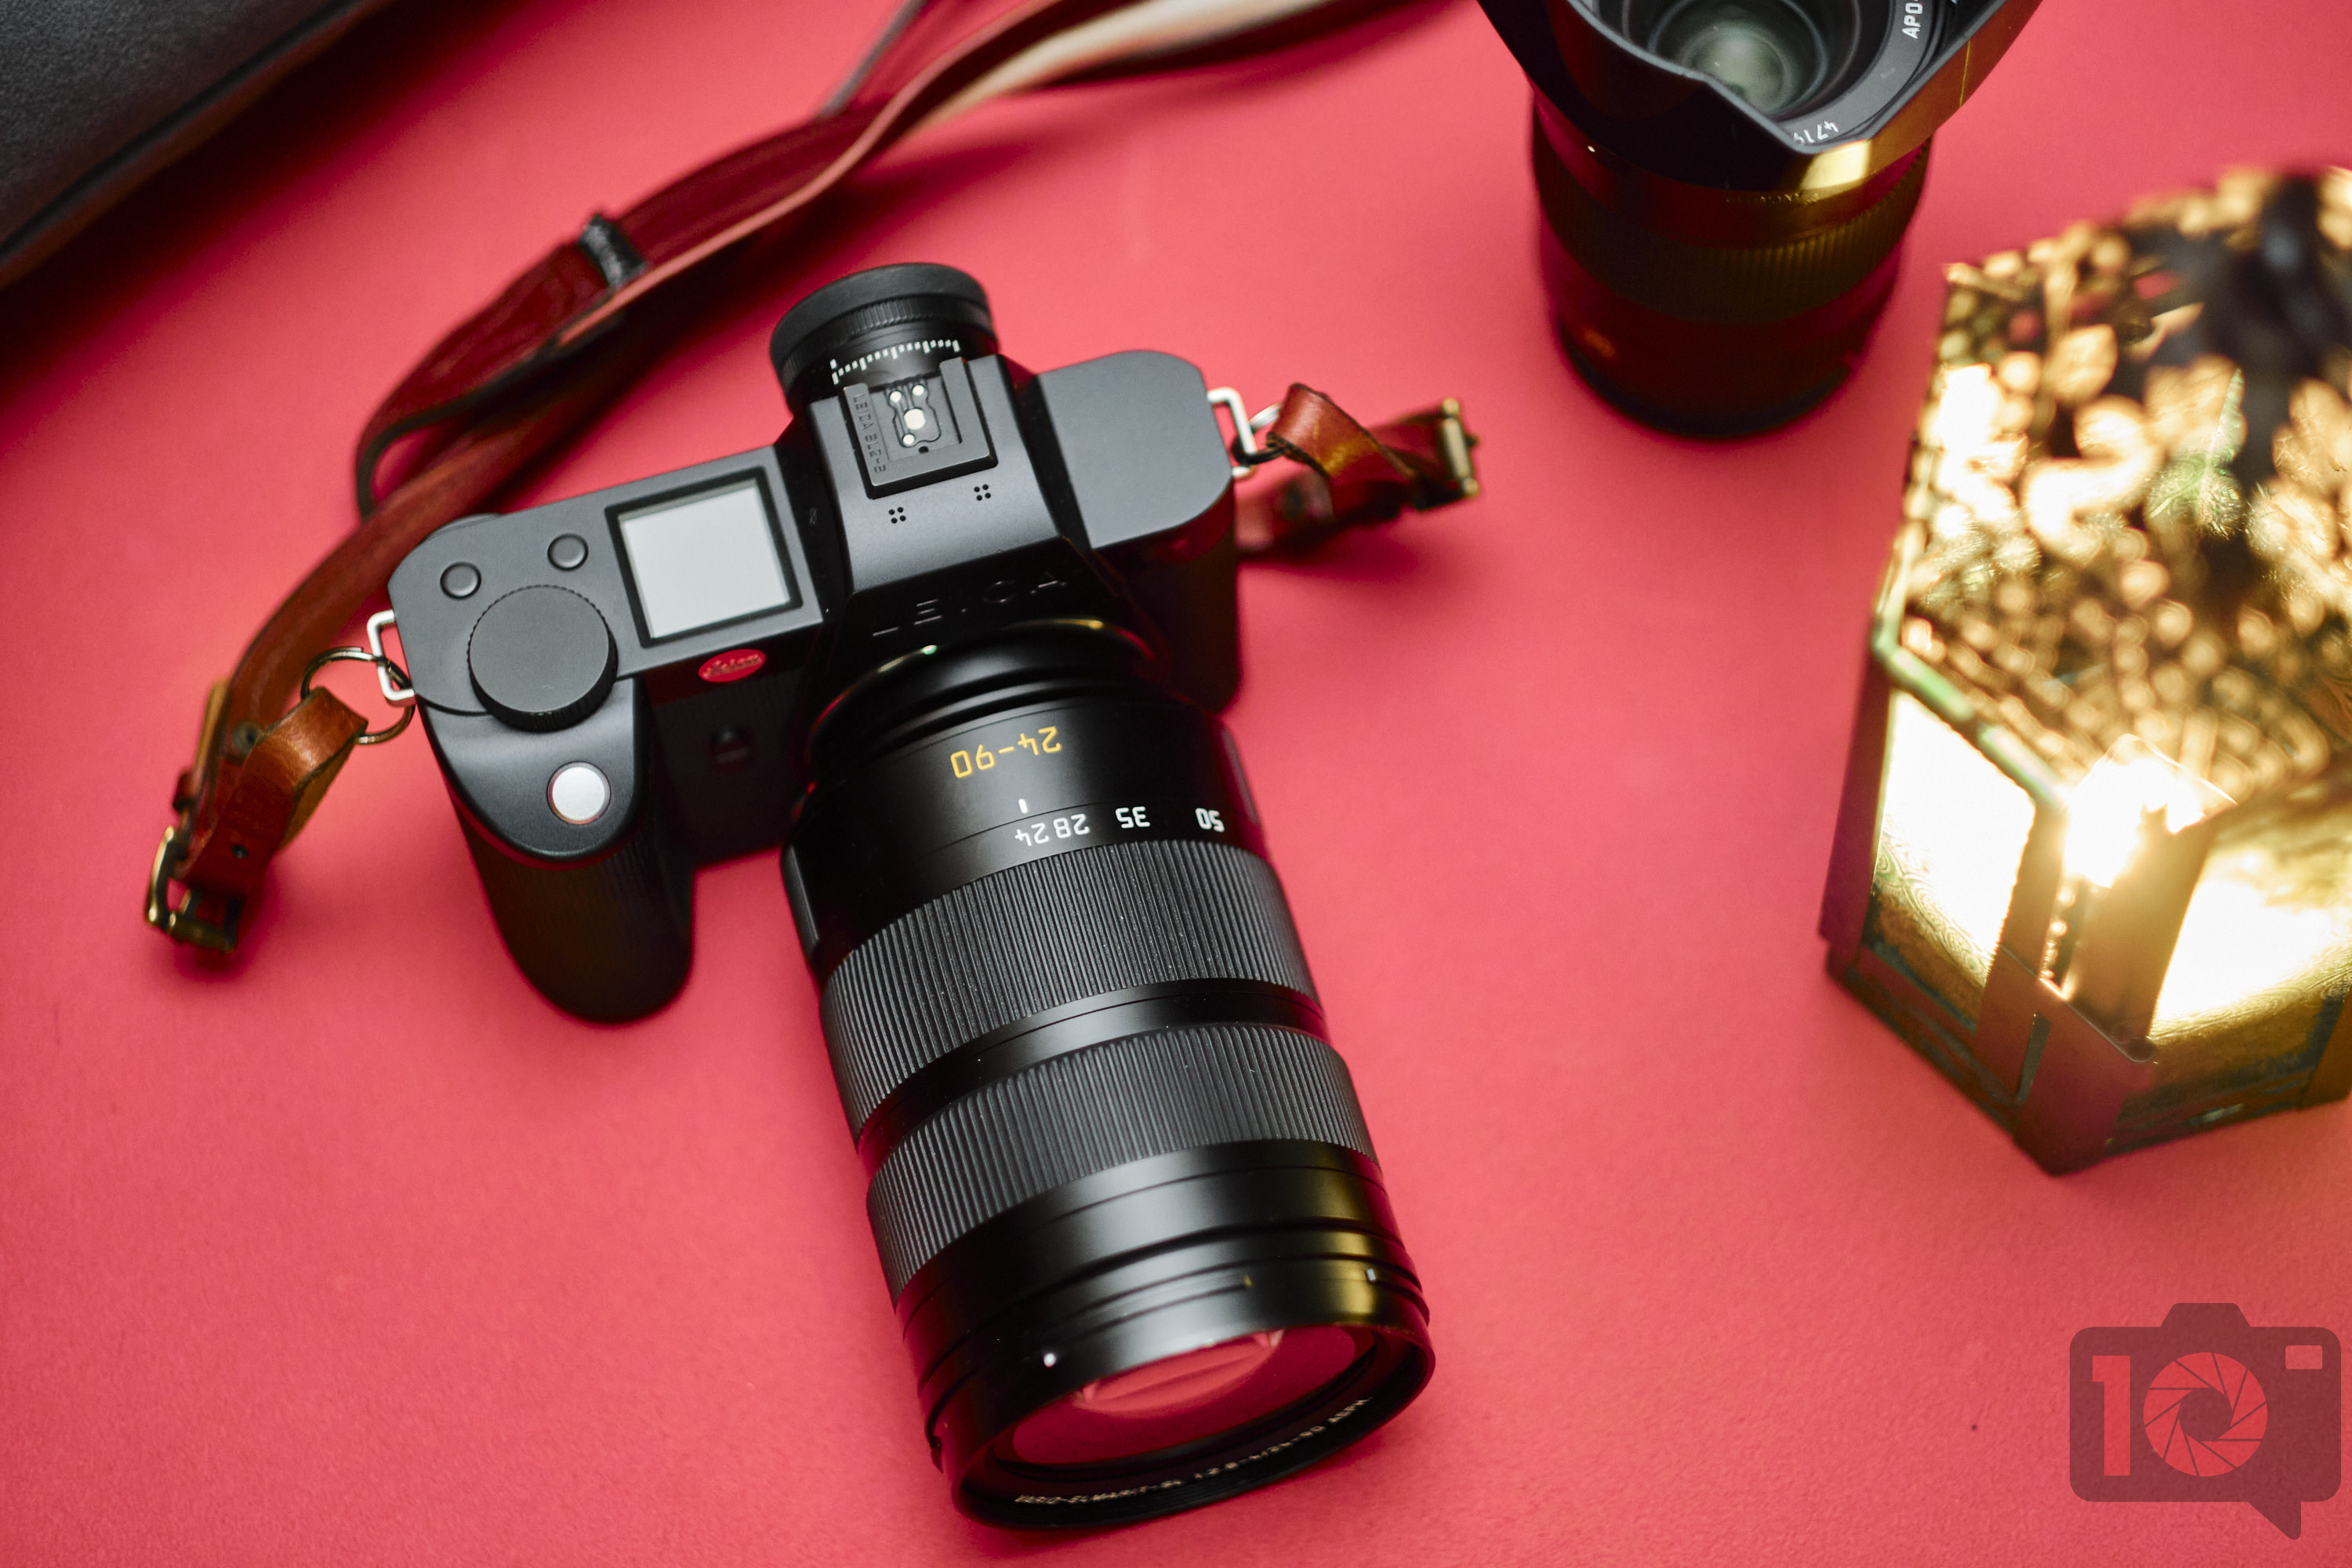 3 Reasons to Buy the Best Cameras You Want (But May Not Need)